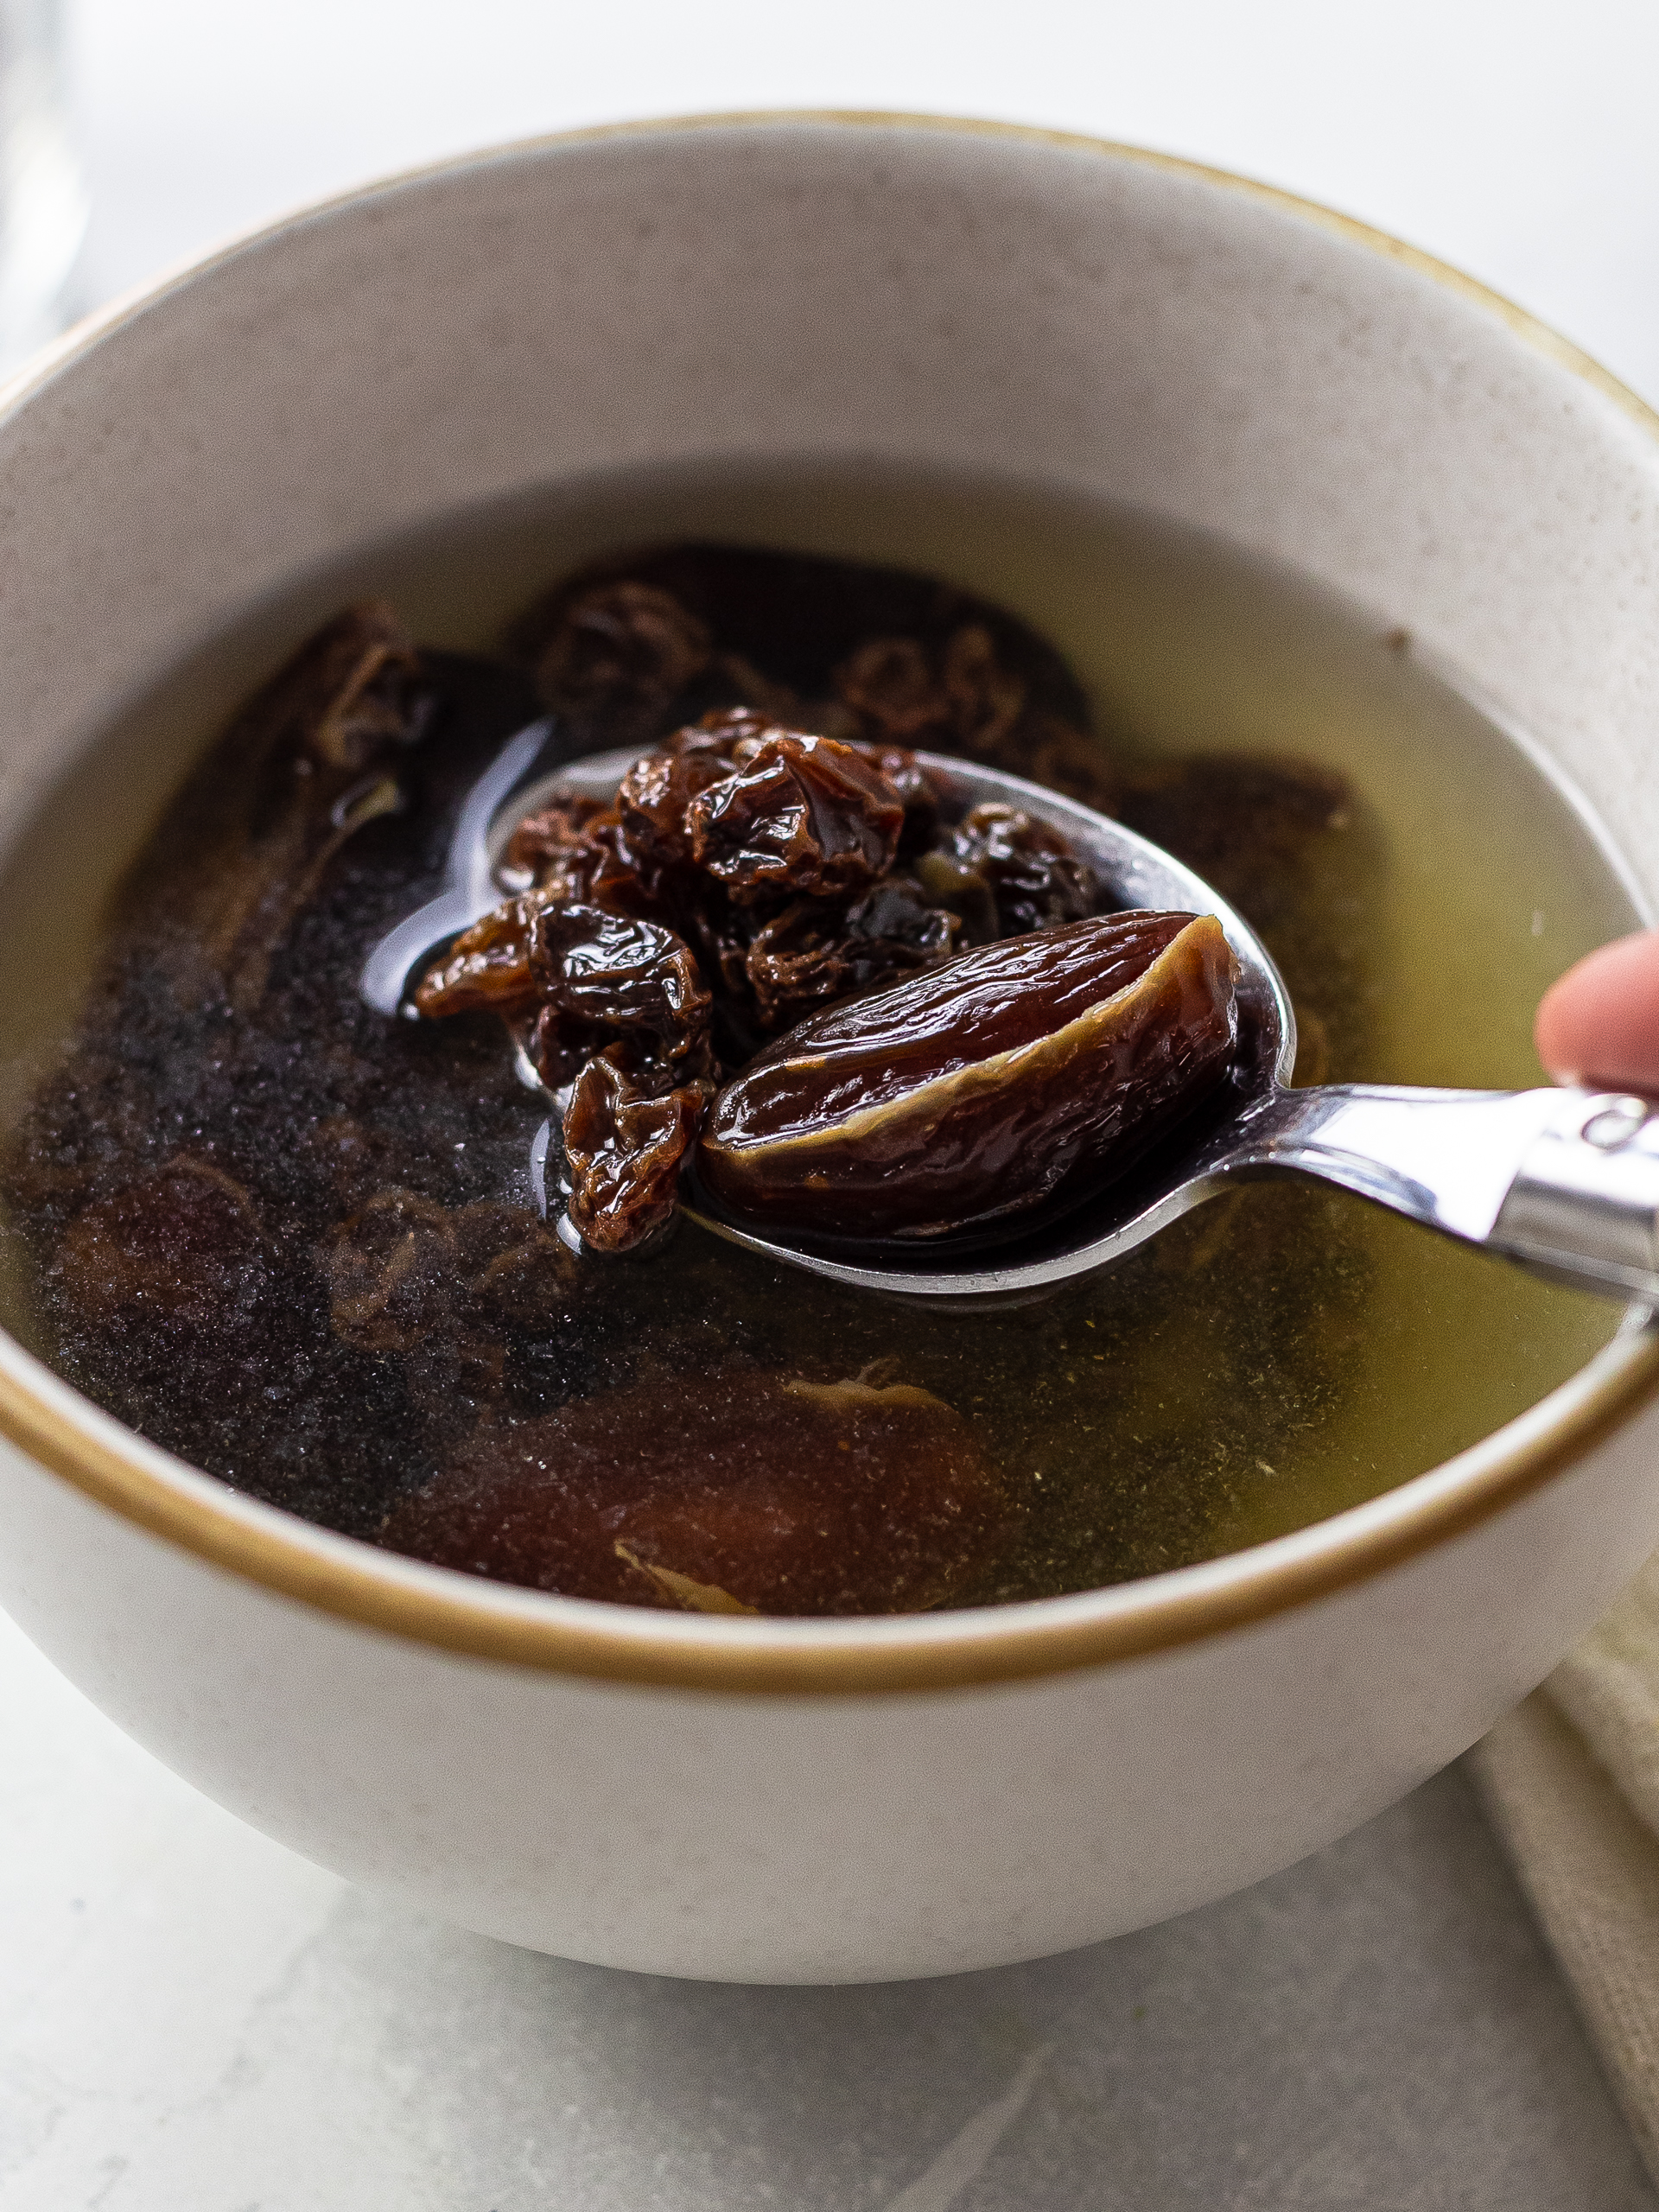 dates and raisins soaking in a bowl of hot water